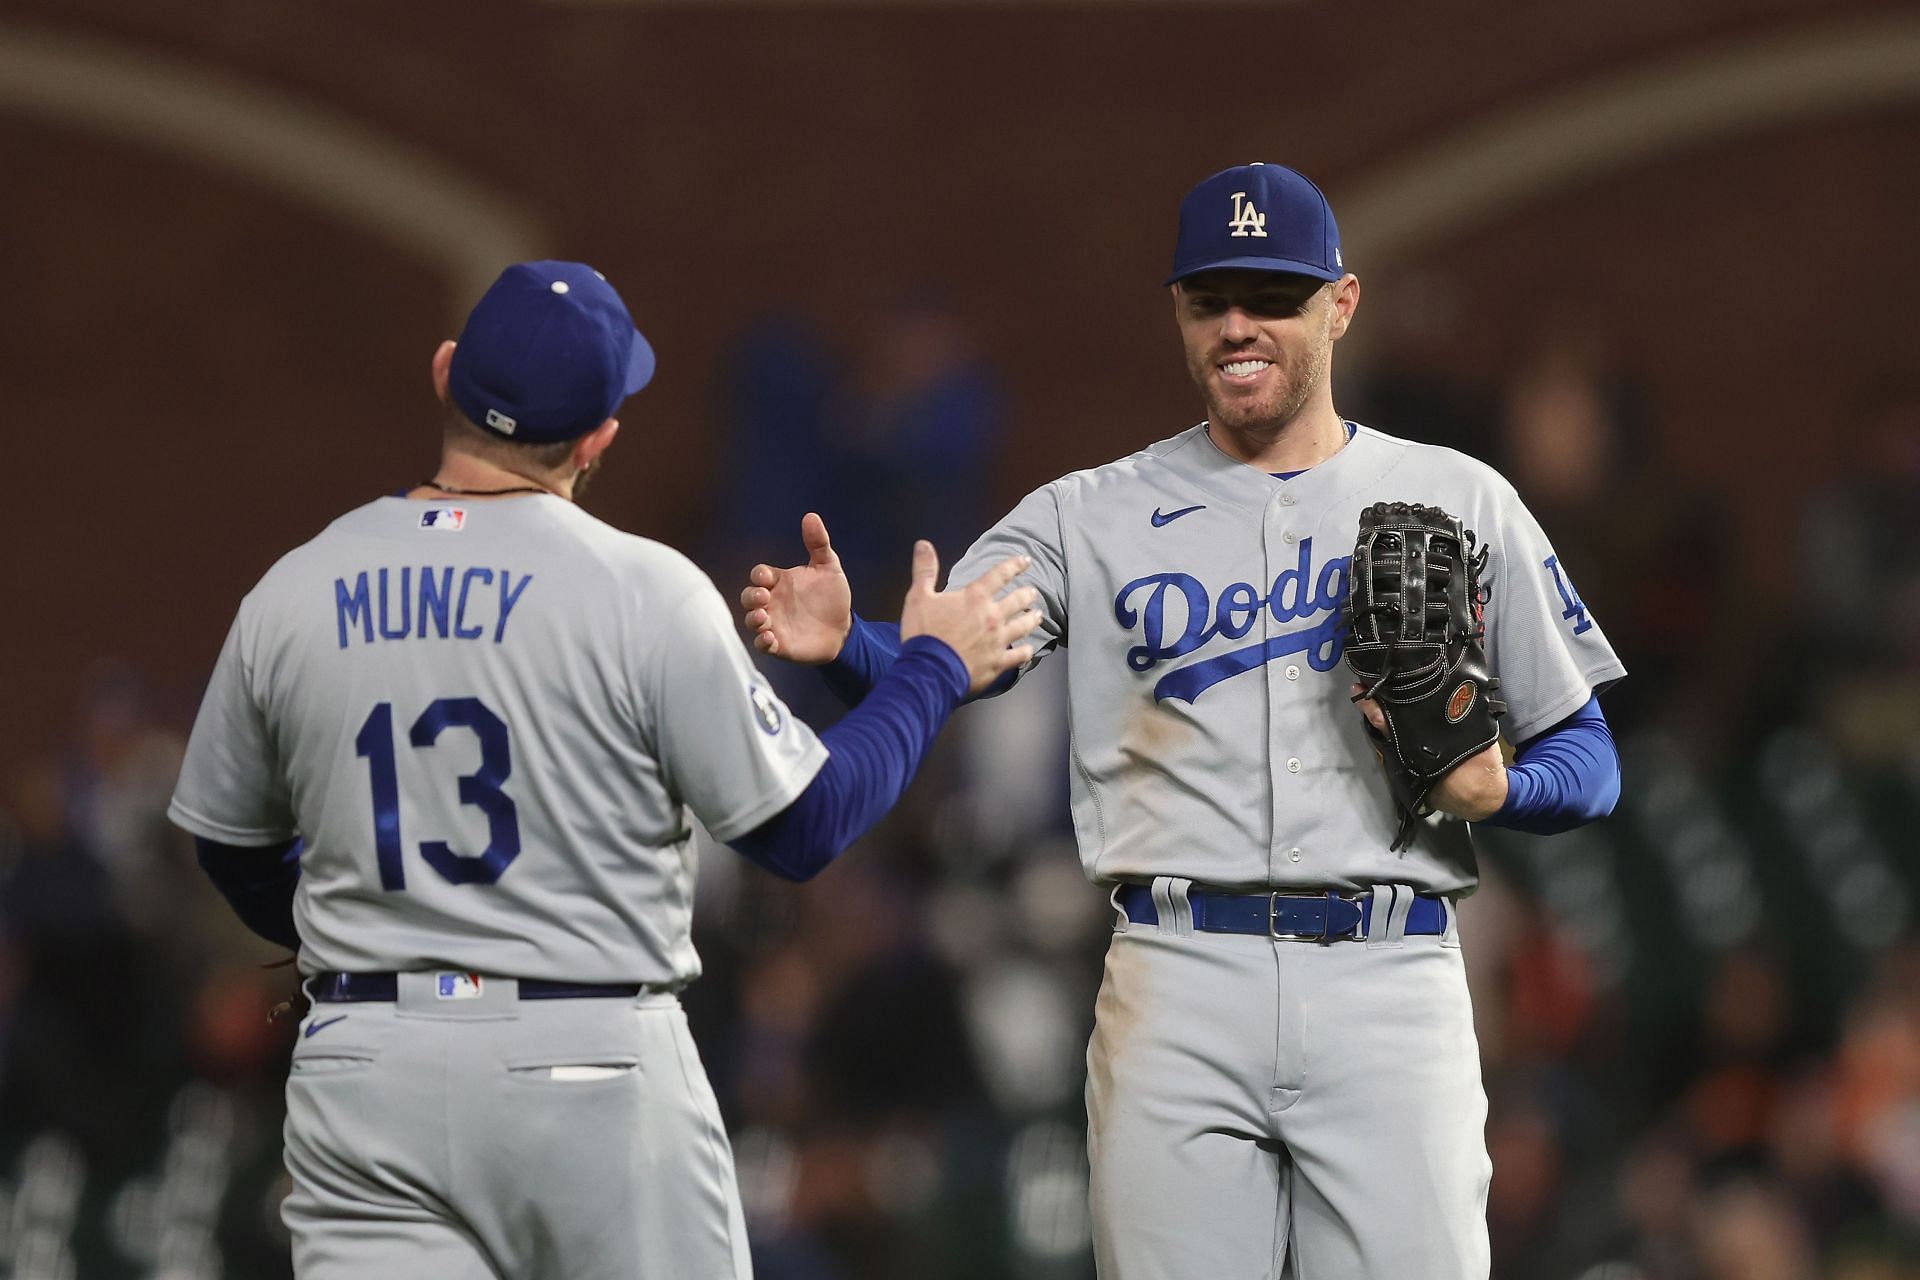 Max Muncy and Freddie Freeman of the Los Angeles Dodgers celebrate after a win against the San Francisco Giants